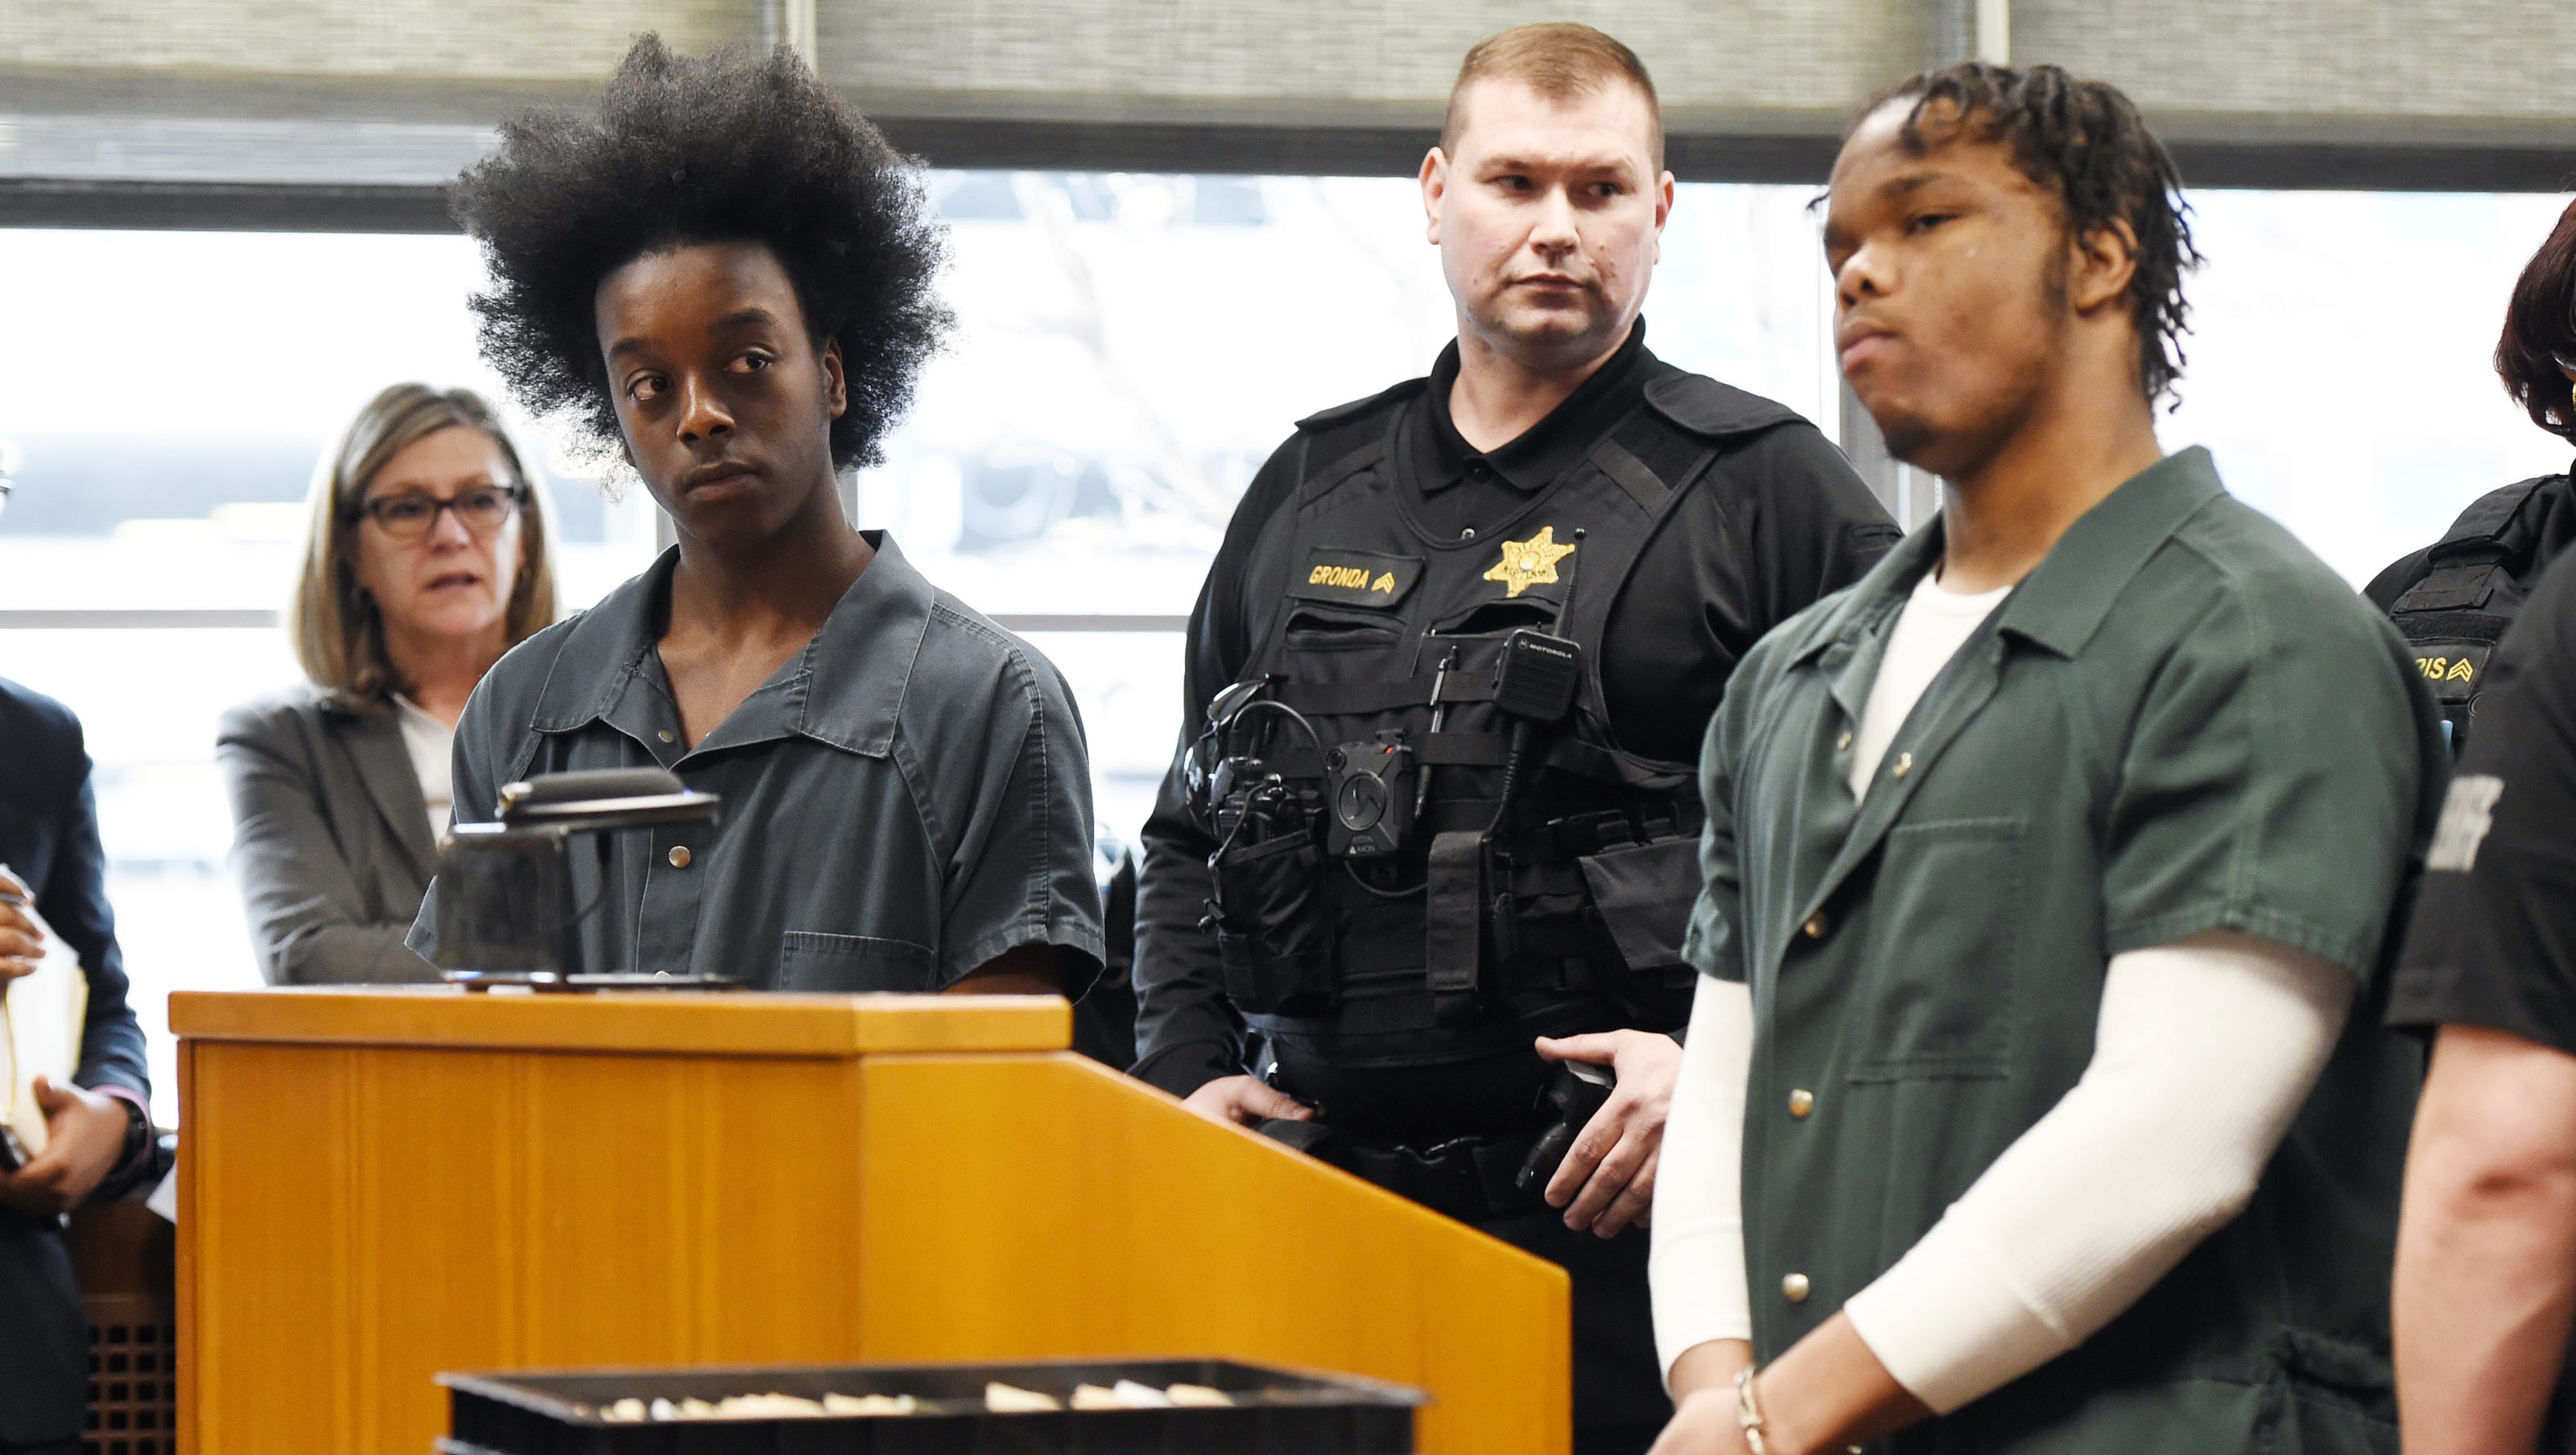 ilt Litteratur Mainstream 2 sentenced in 2016 fatal shooting of student during robbery attempt